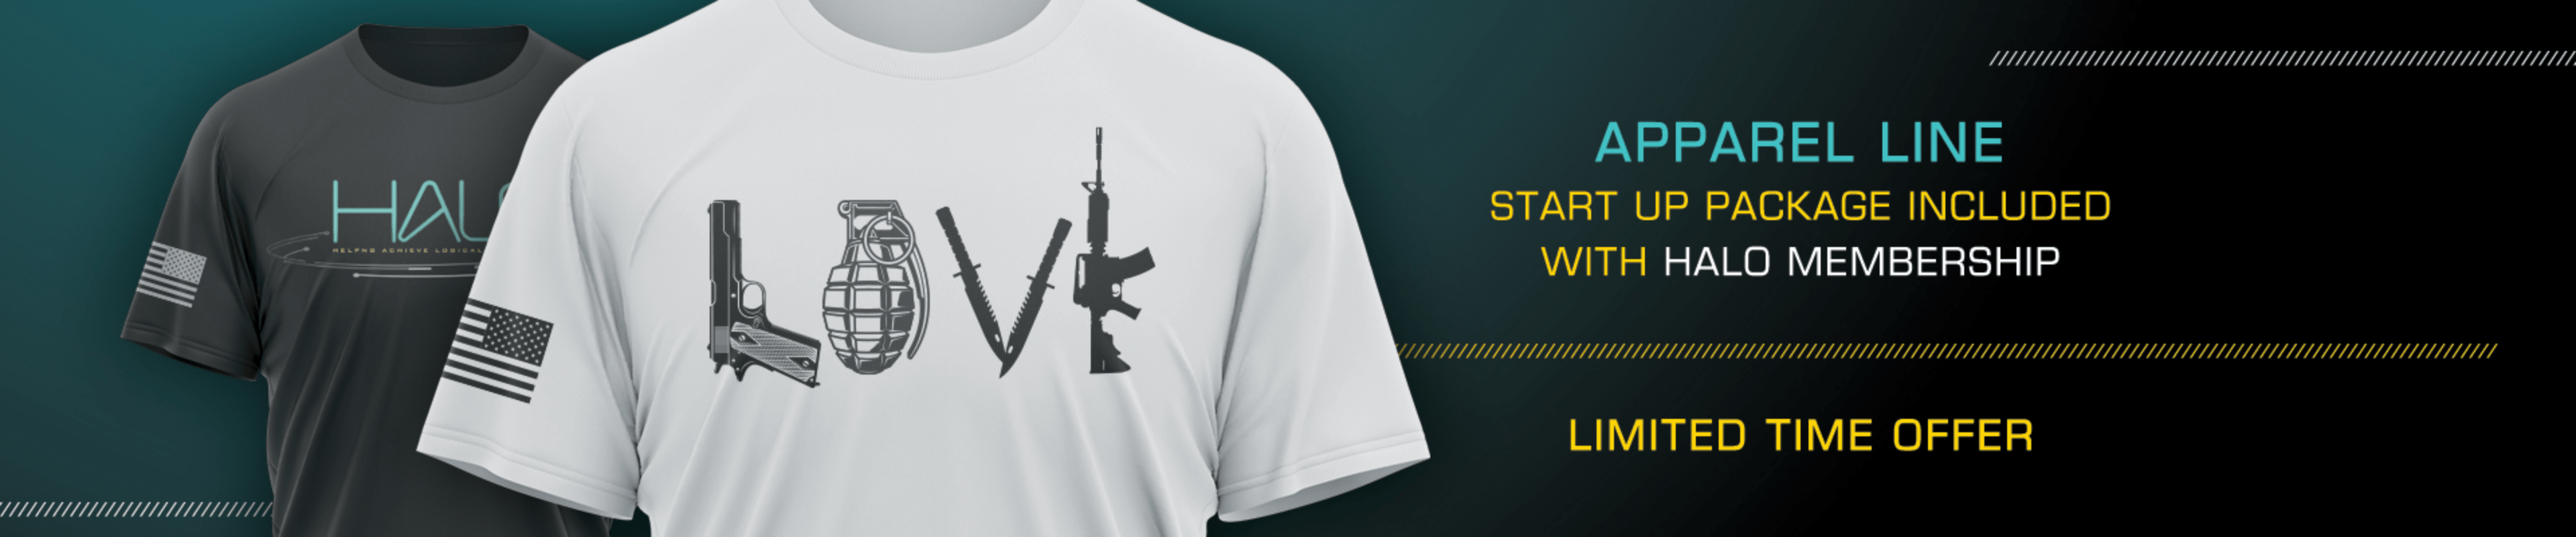 apparel line start up package included with halo membership